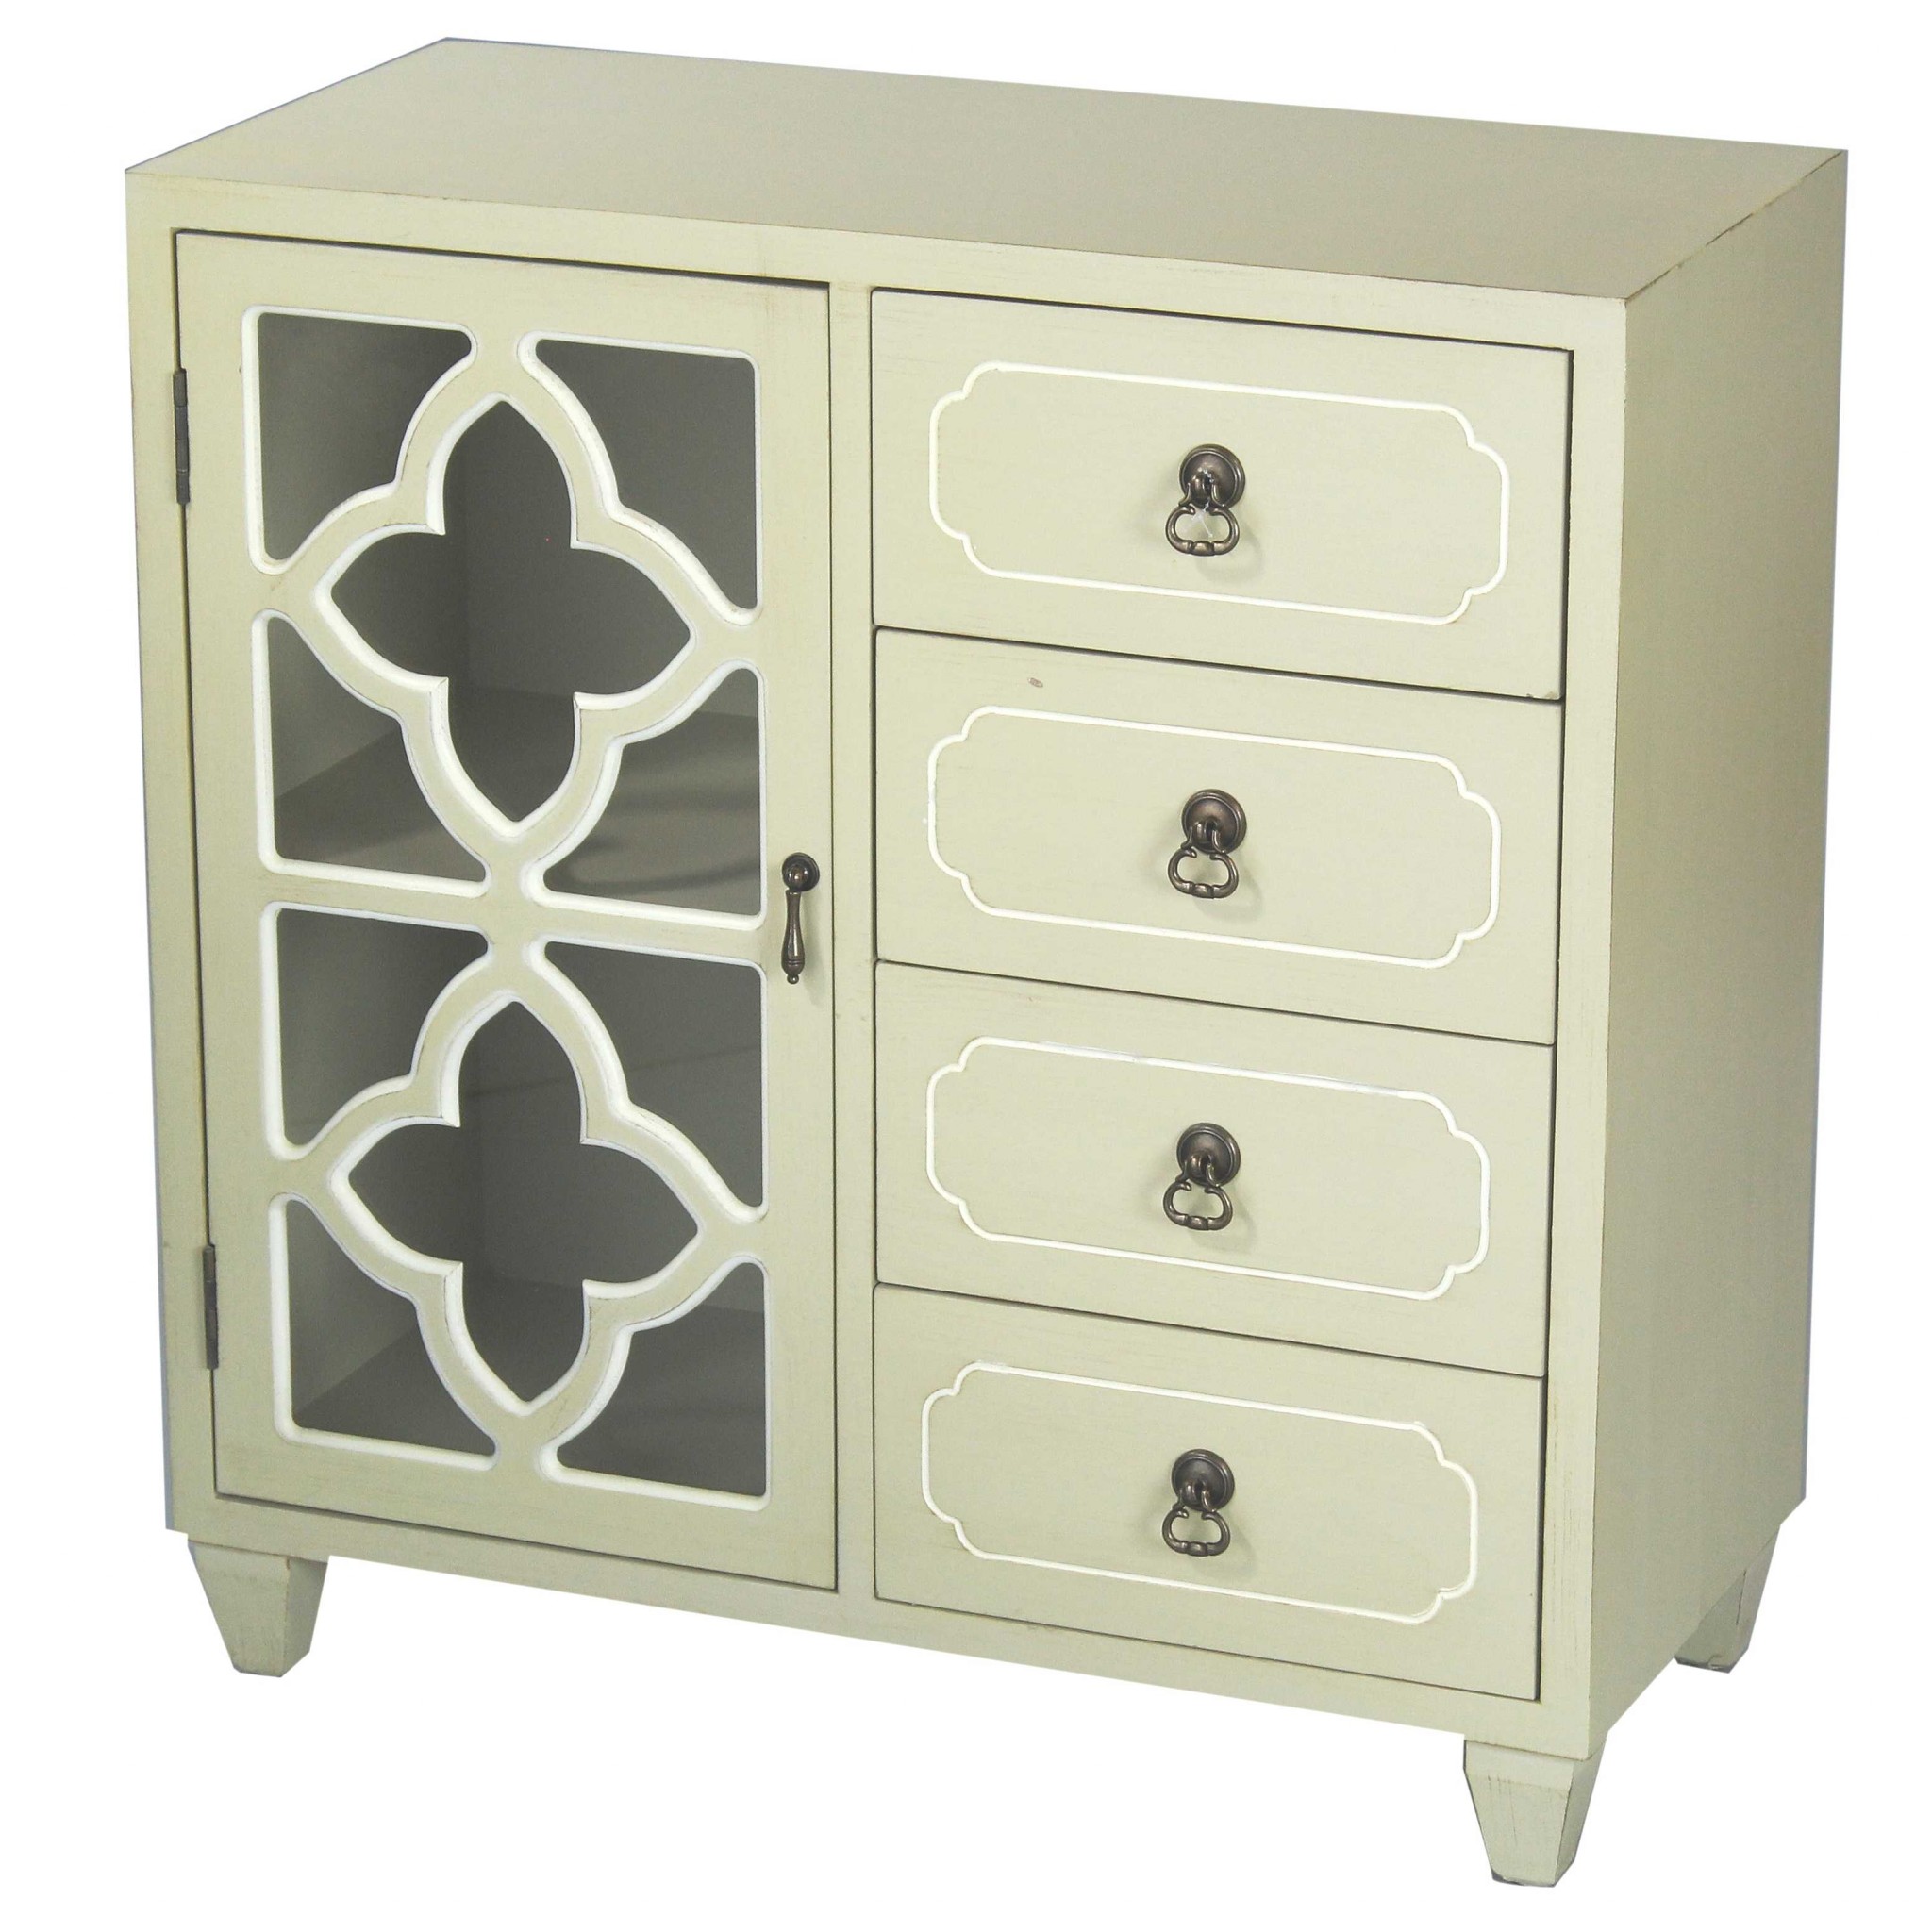 29.5" X 14" X 30.75" Beige MDF Wood Clear Glass Antique Style Sideboard with a Door and Drawers